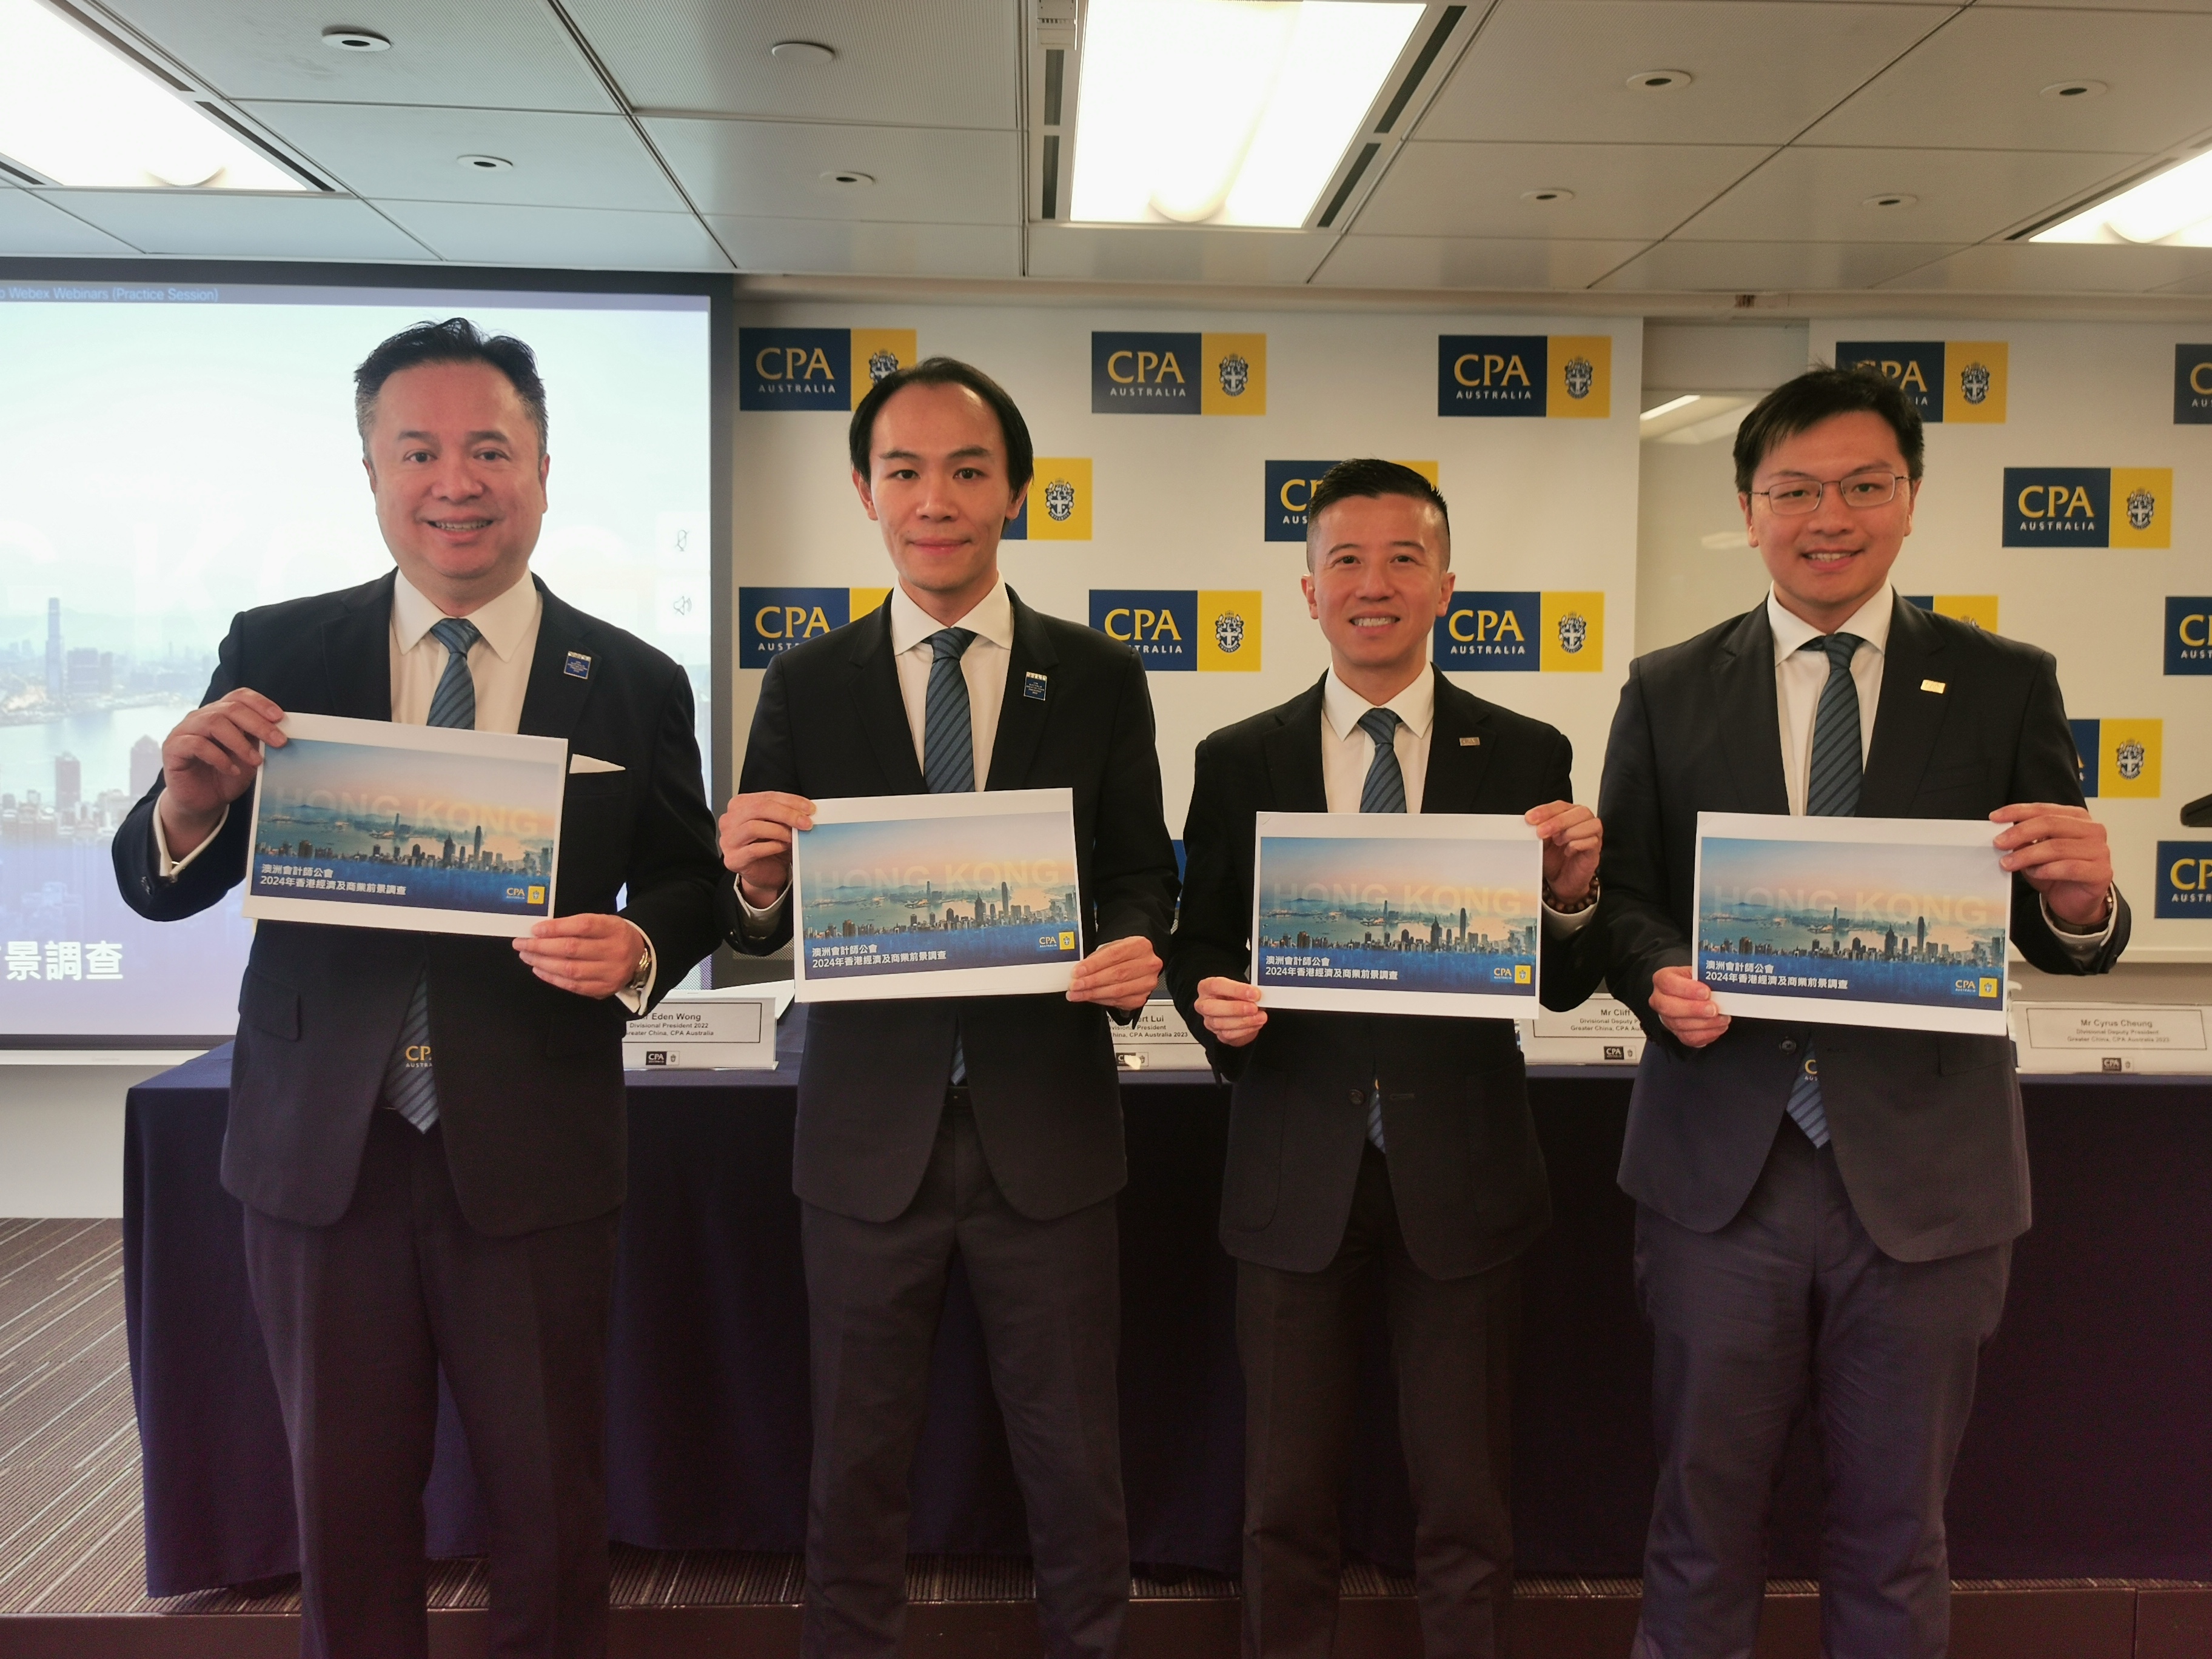 (from left to right) Mr Eden Wong FCPA (Aust.) Divisional Councillor 2023 and Divisional President 2022, CPA Australia Greater China Mr Robert Lui FCPA (Aust.) Divisional President 2023 and Chairperson of Continuing Professional Development Committee, CPA Australia Greater China Mr Cliff Ip FCPA (Aust.) Divisional Deputy President 2023 and Chairperson of Financial Services Committee, CPA Australia Greater China Mr Cyrus Cheung FCPA (Aust.) Divisional Deputy President 2023 and Chairperson of ESG Committee, CPA Australia Greater China